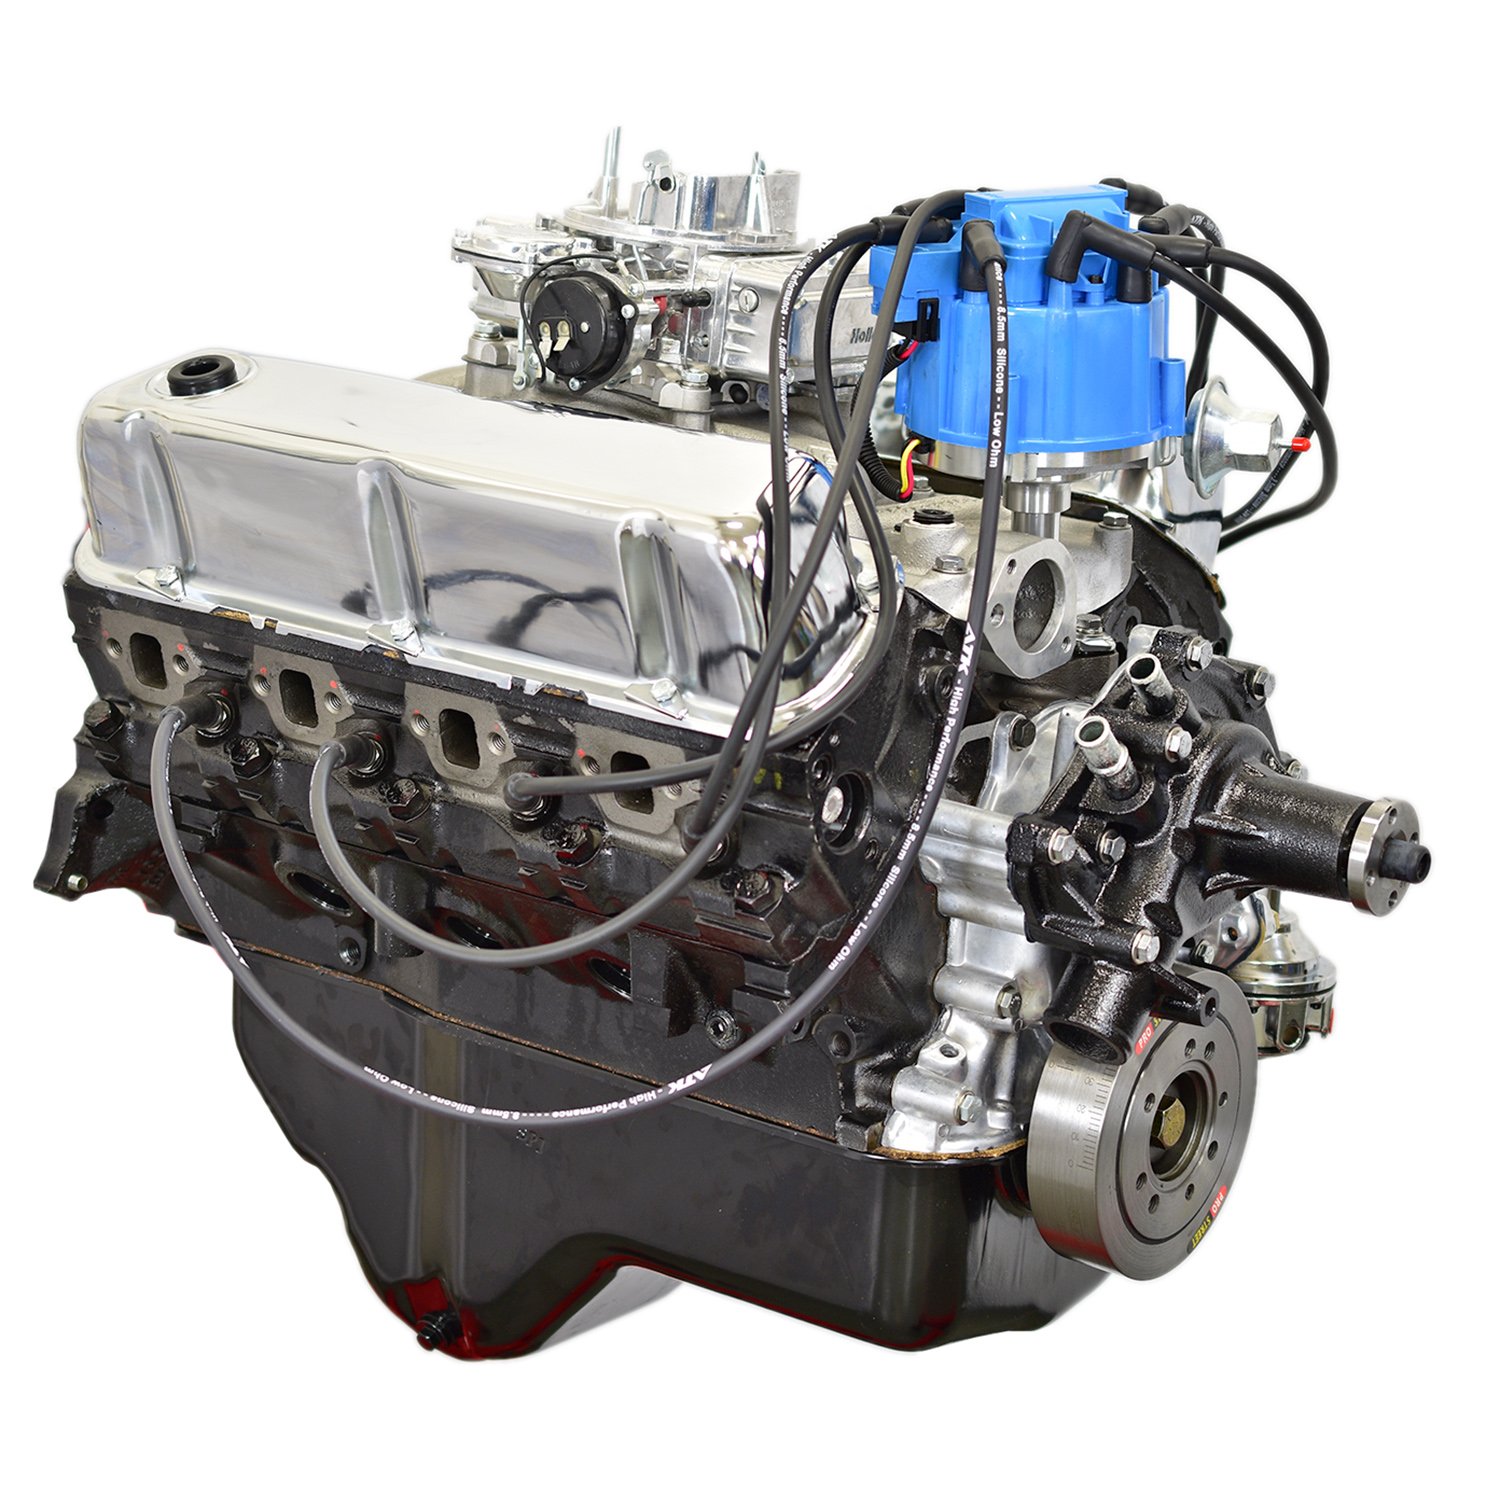 HP99FT HP Drop In Crate Engine Small Block Ford 302ci / 240HP / 325TQ